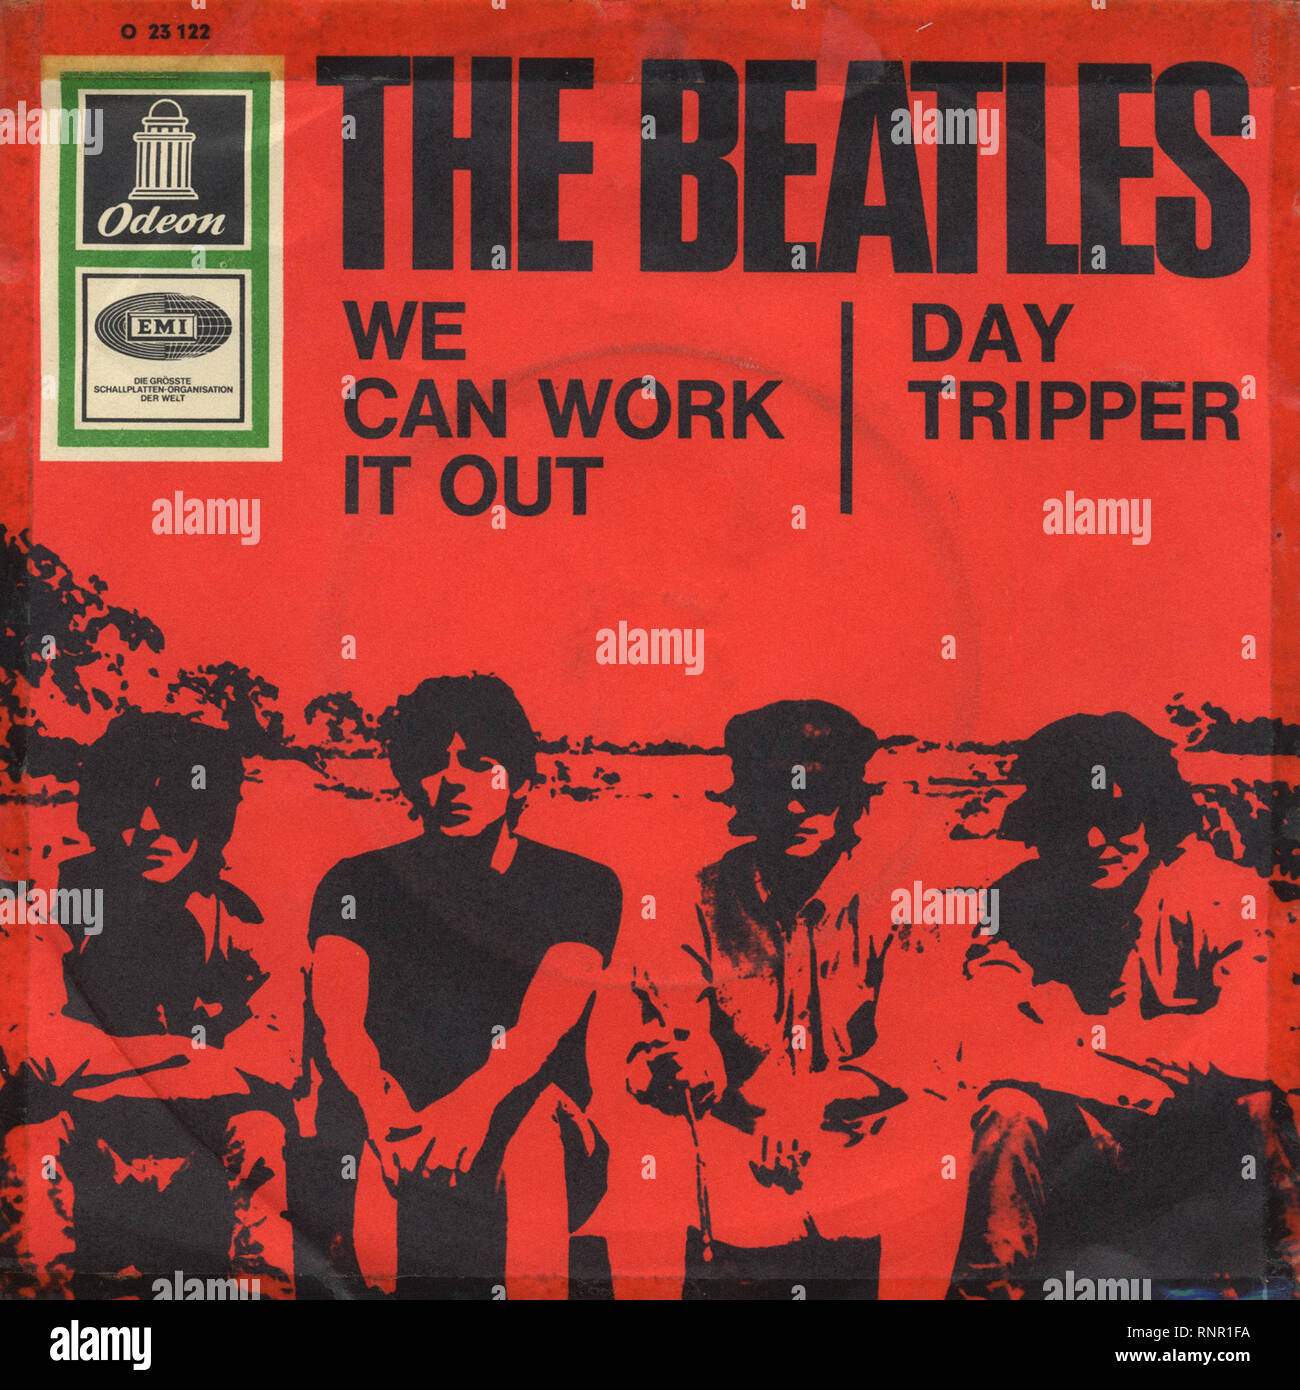 The Beatles - Day Tripper - Vintage Cover Album Stock Photo